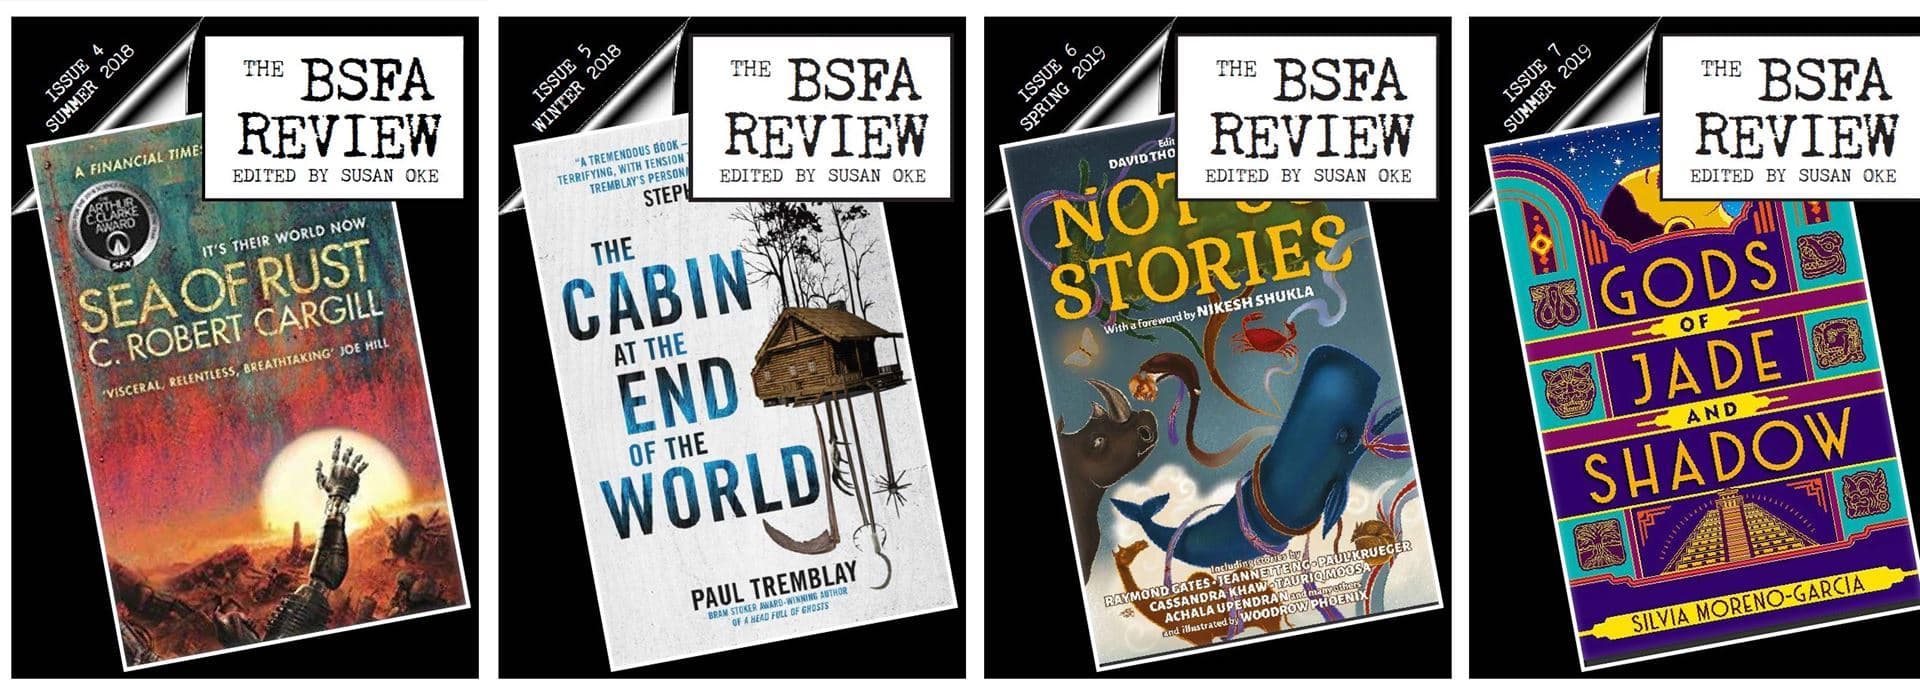 The BSFA Review 4, 5, 6 and 7